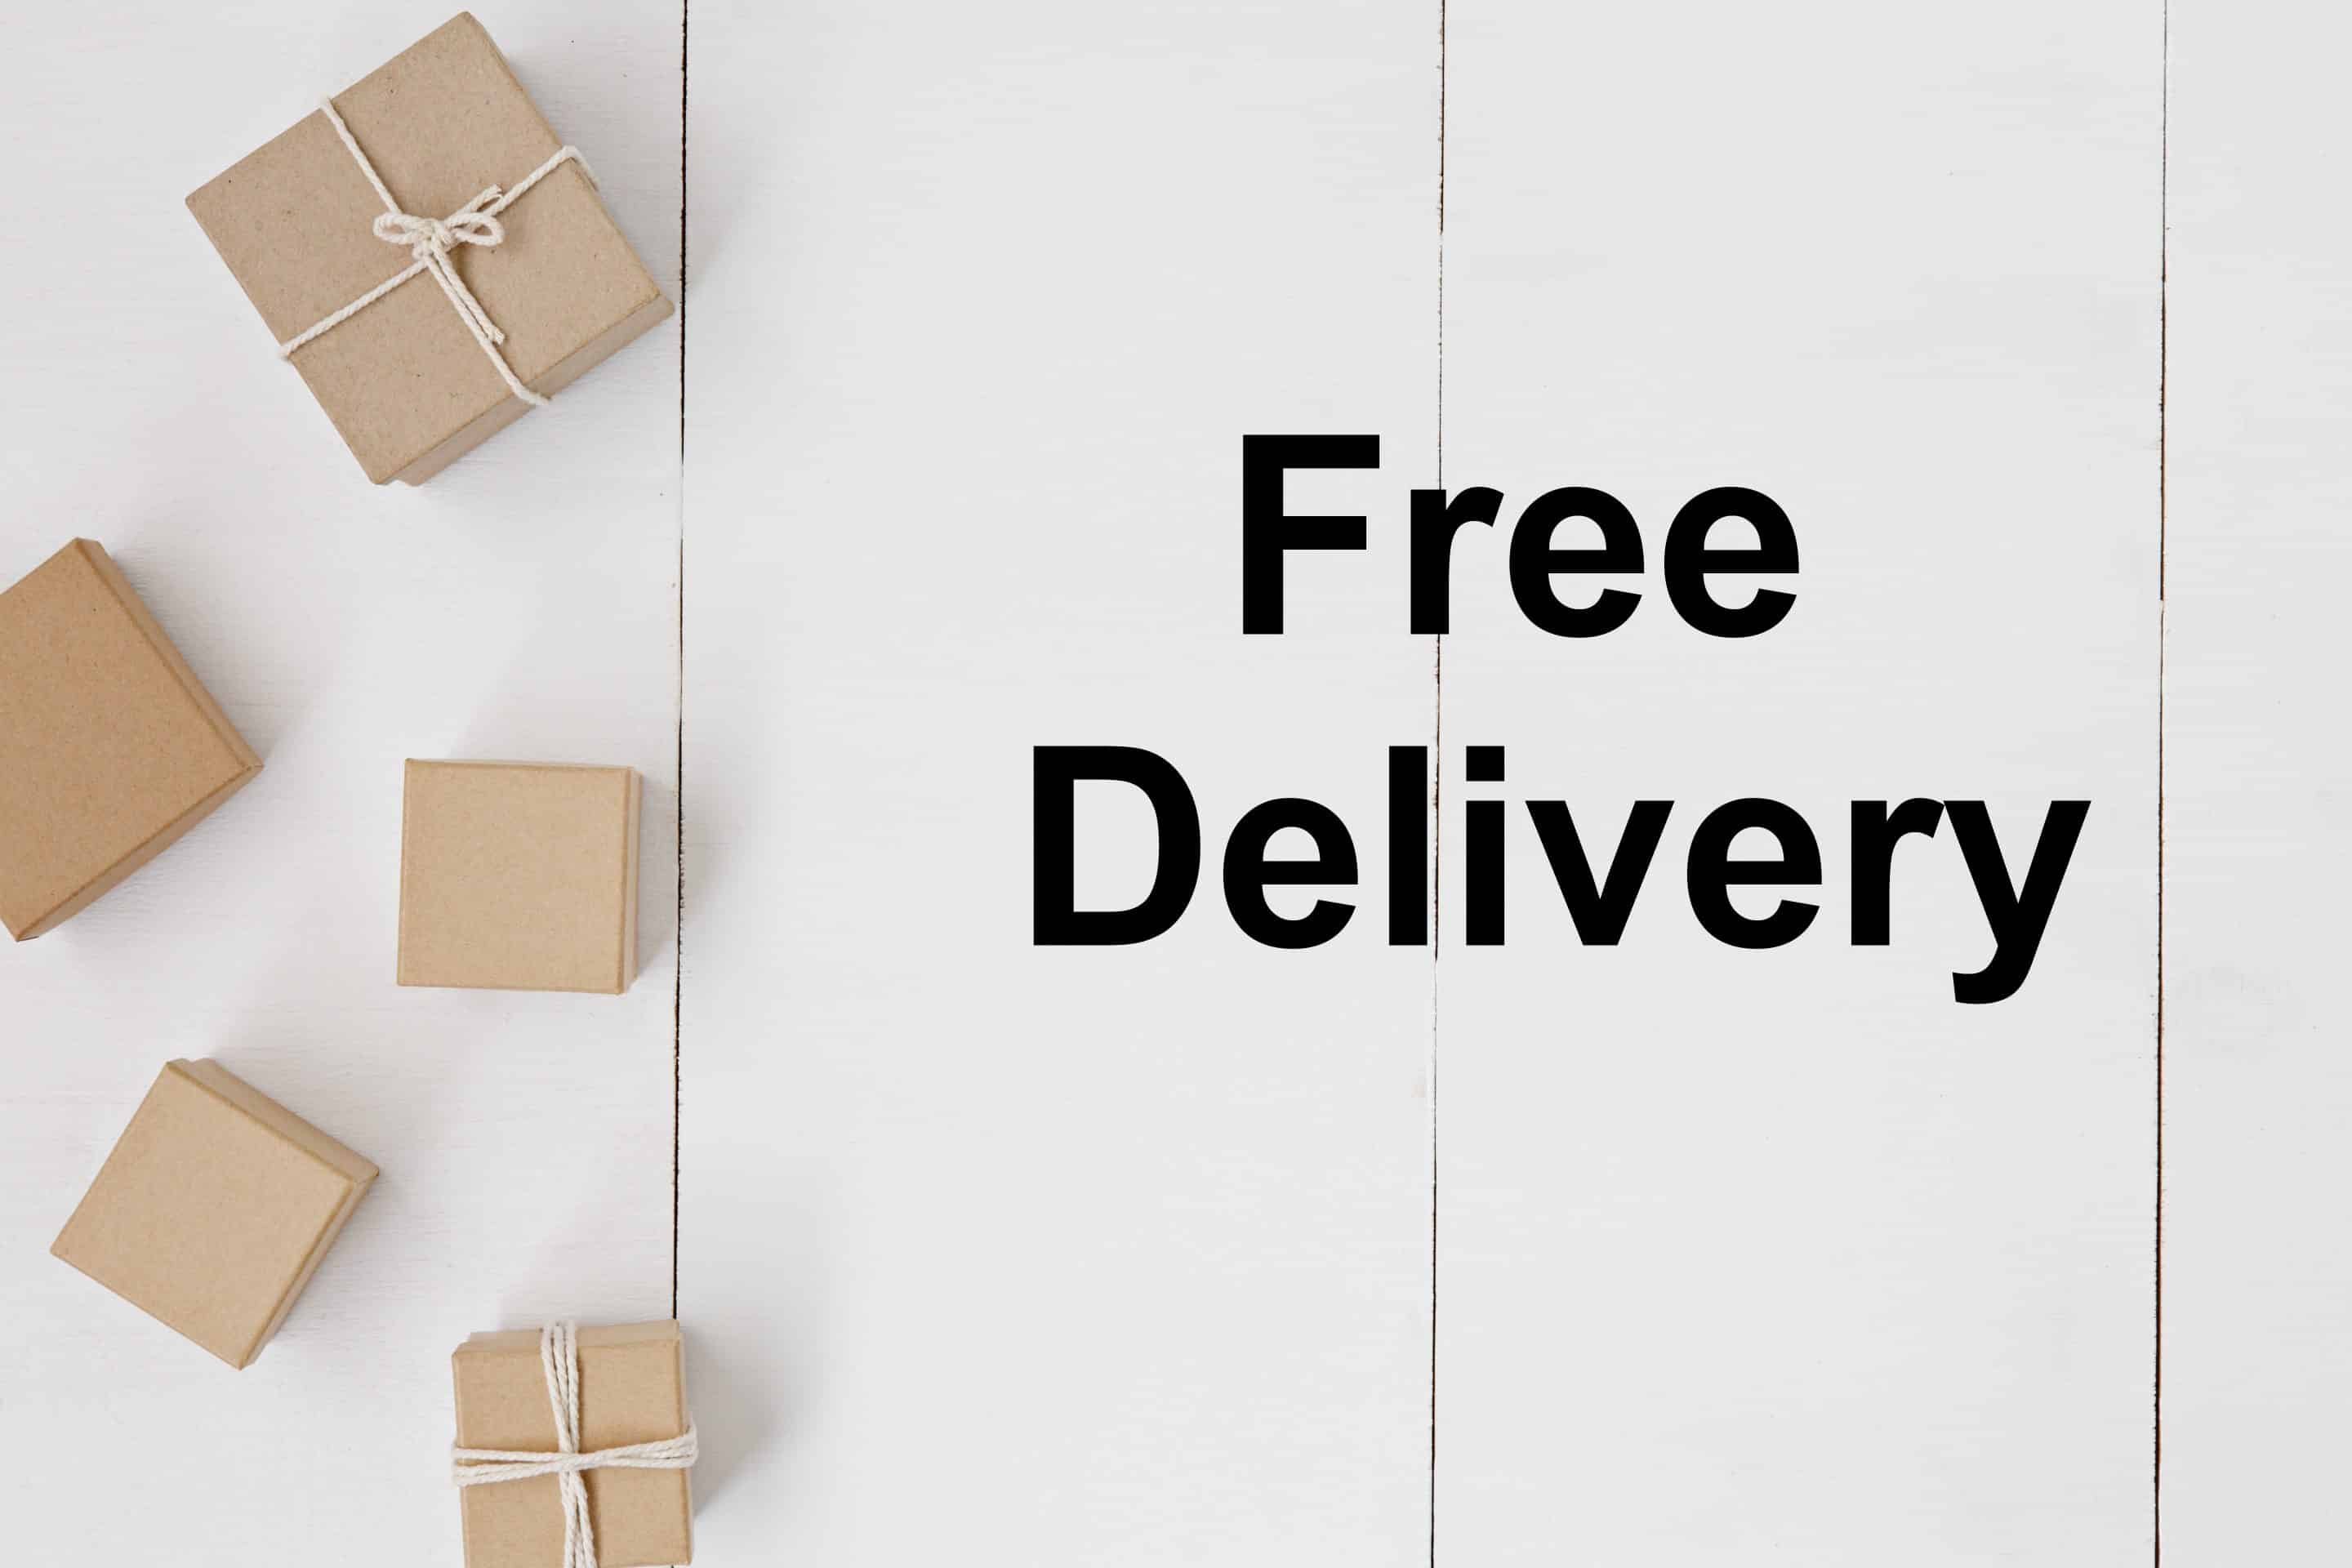 free delivery as a marketing strategy